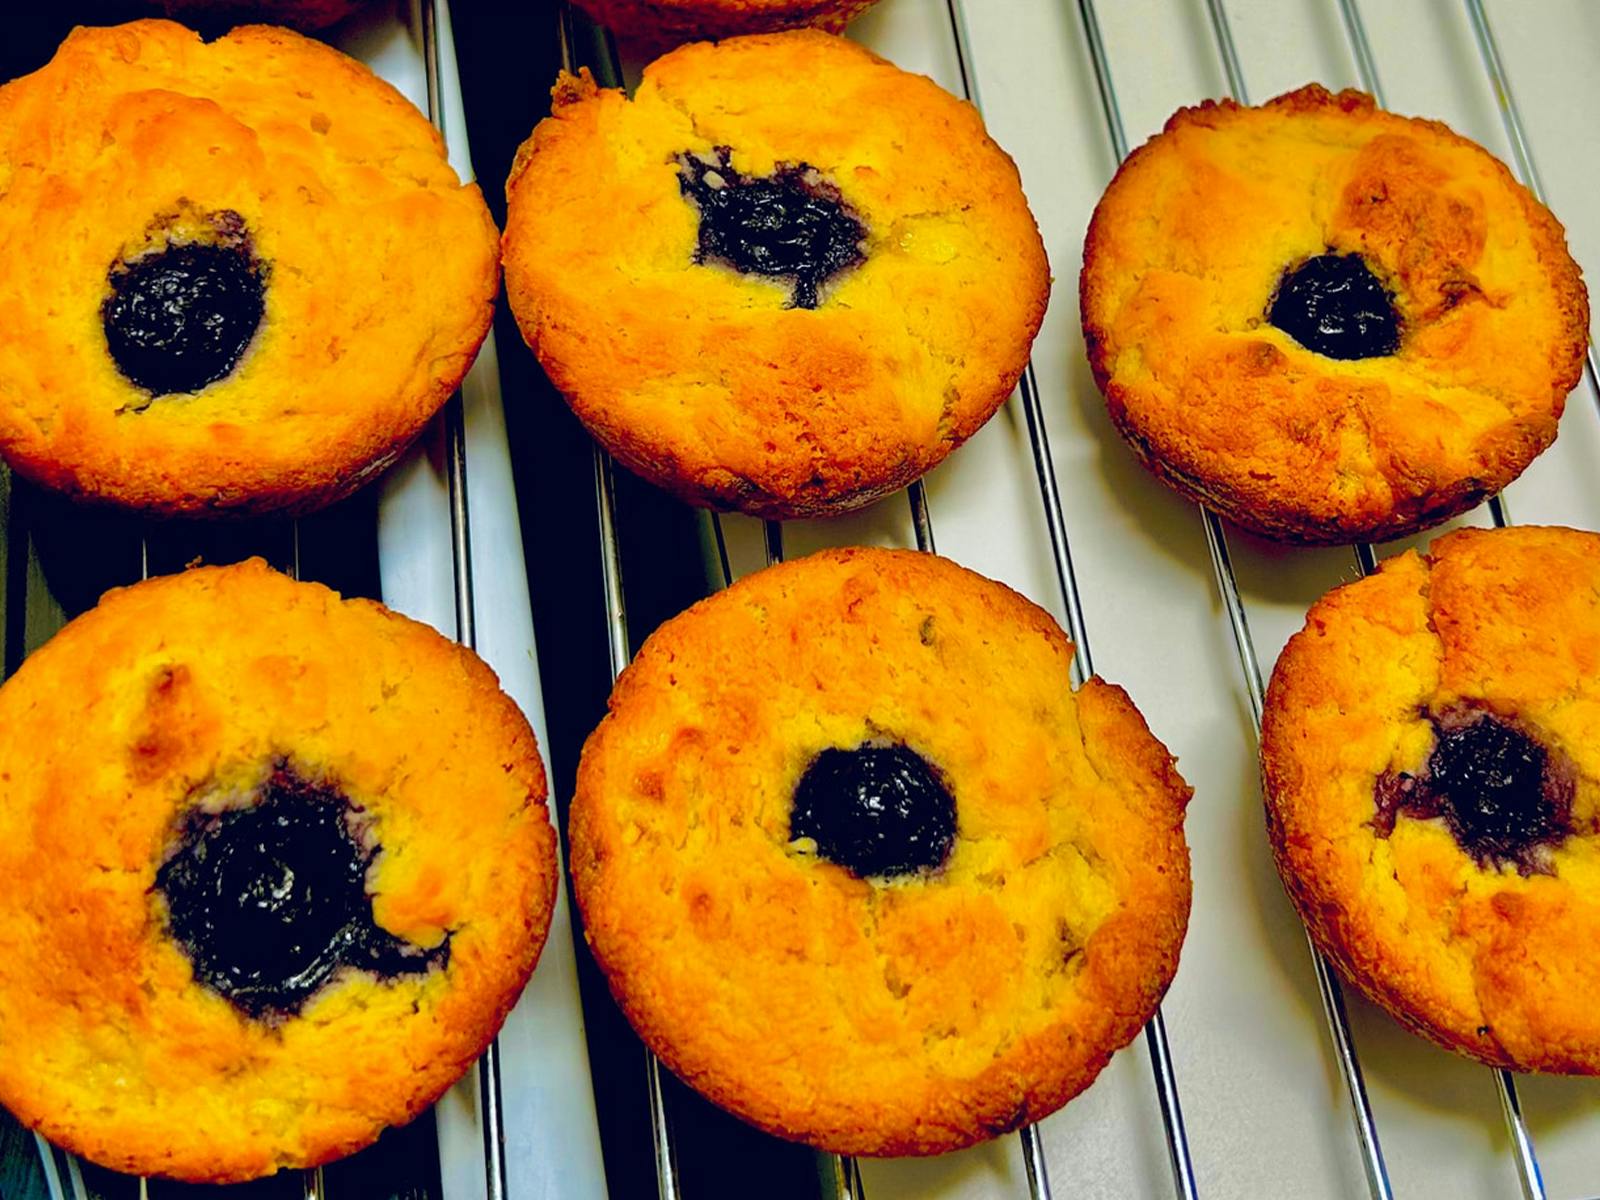 Oven baked muffins with blueberry topped.